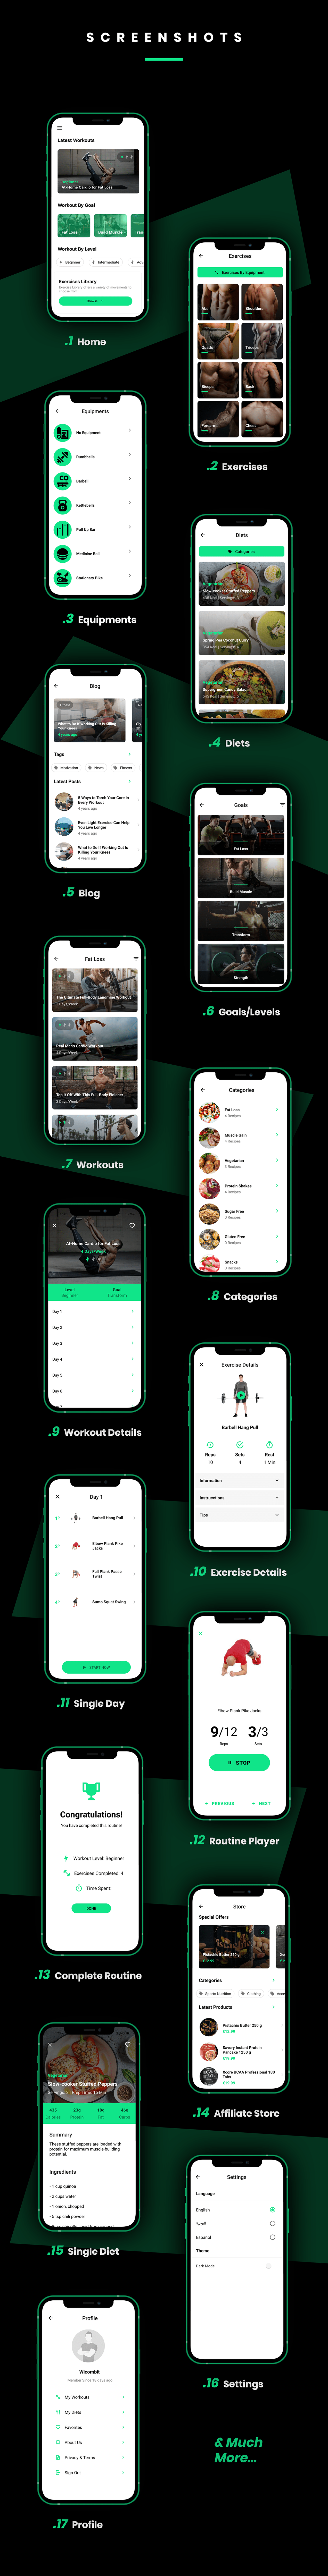 FitBasic - Complete React Native Fitness App + Multi-Language + RTL Support - 5